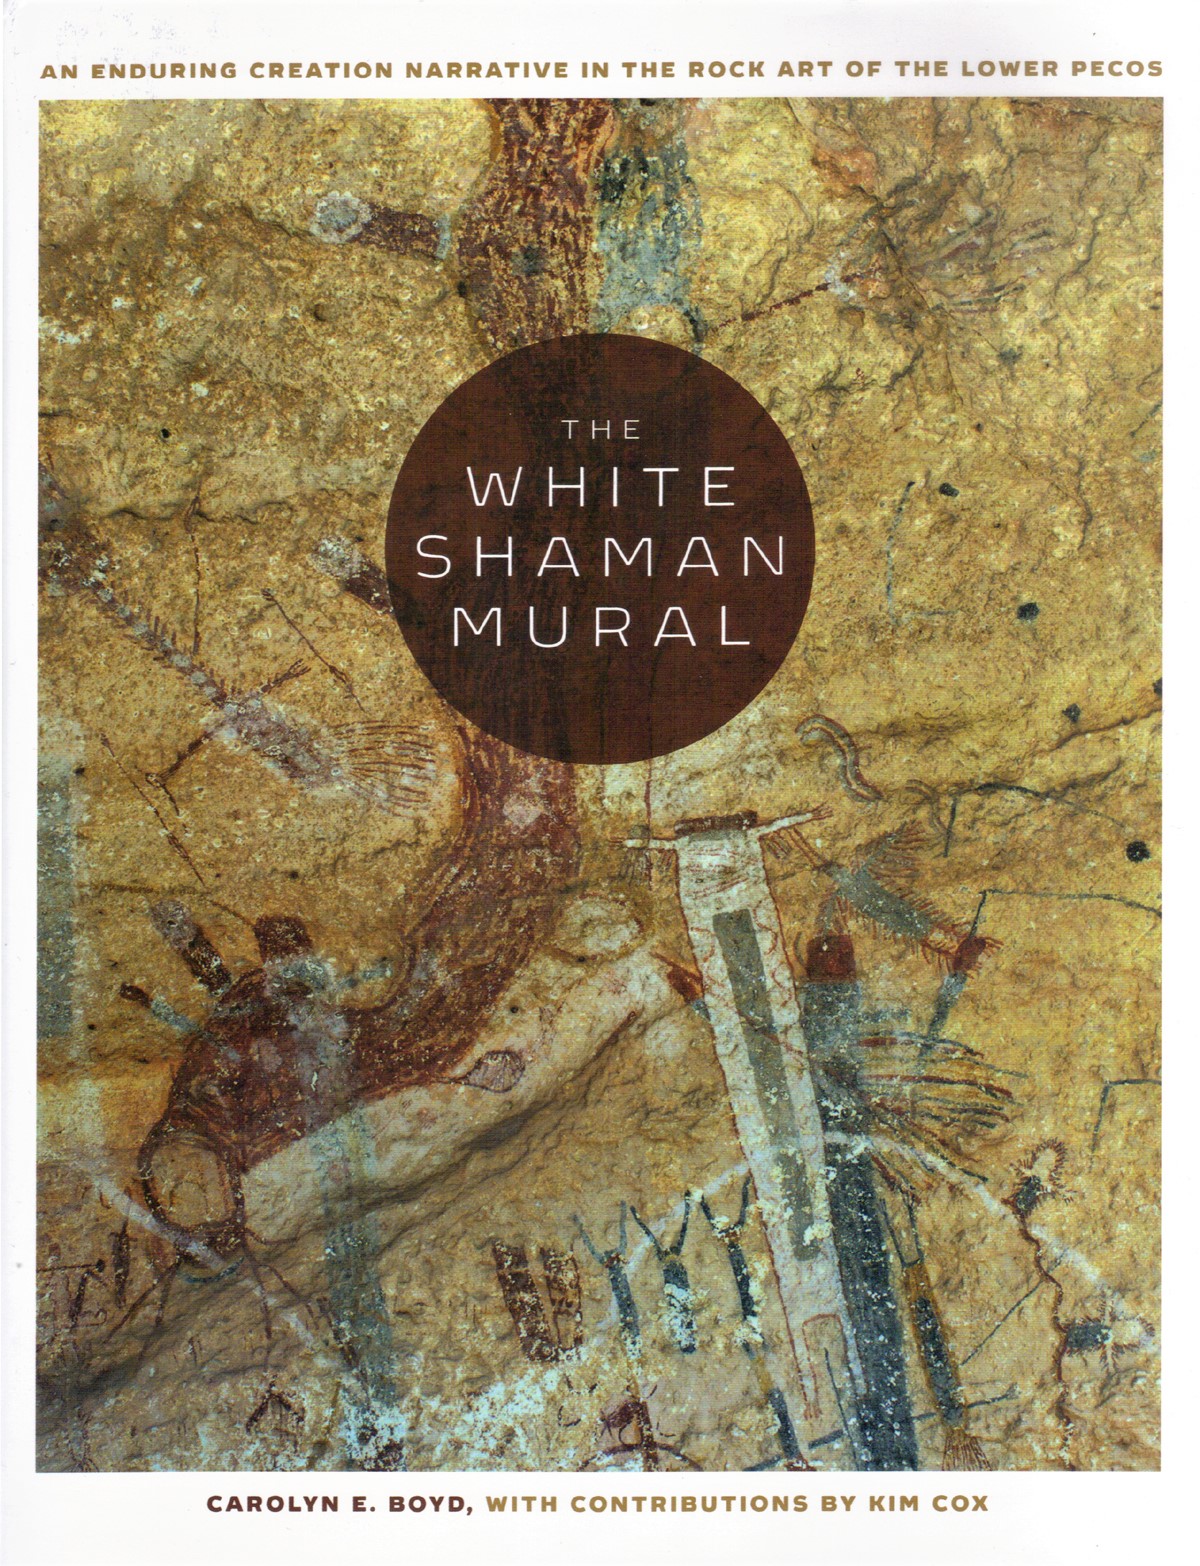 The White Shaman Mural by Carolyn Boyd. Rock art of the Lower Pecos